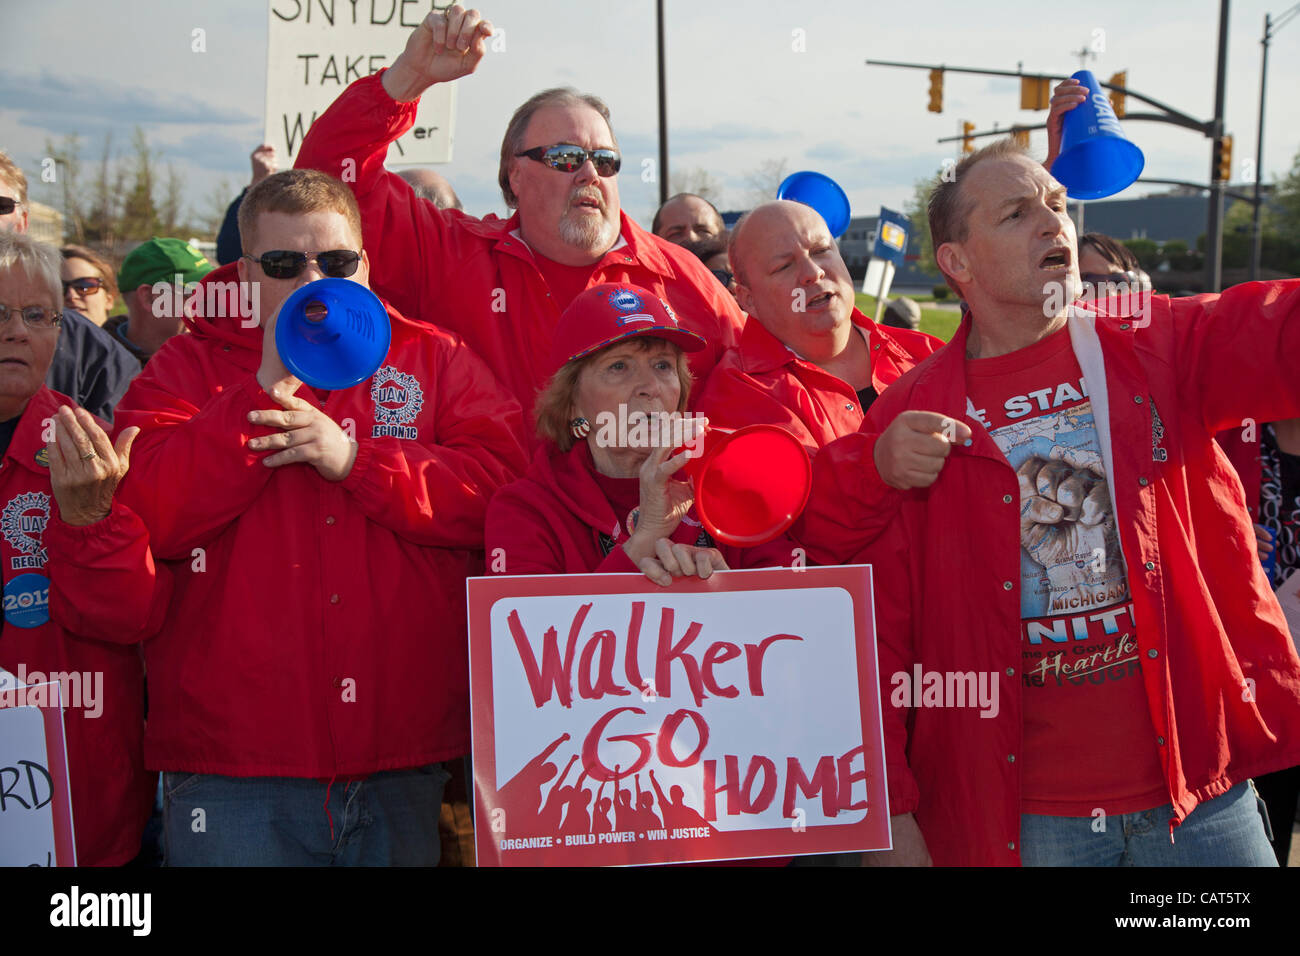 Troy, Michigan - Over a thousand union members picketed a Republican fundraiser featuring Wisconsin Governor Scott Walker and Michigan Governor Rick Snyder. Both governors are unpopular with labor for their anti-union legislation, and Walker is facing a recall election. Stock Photo